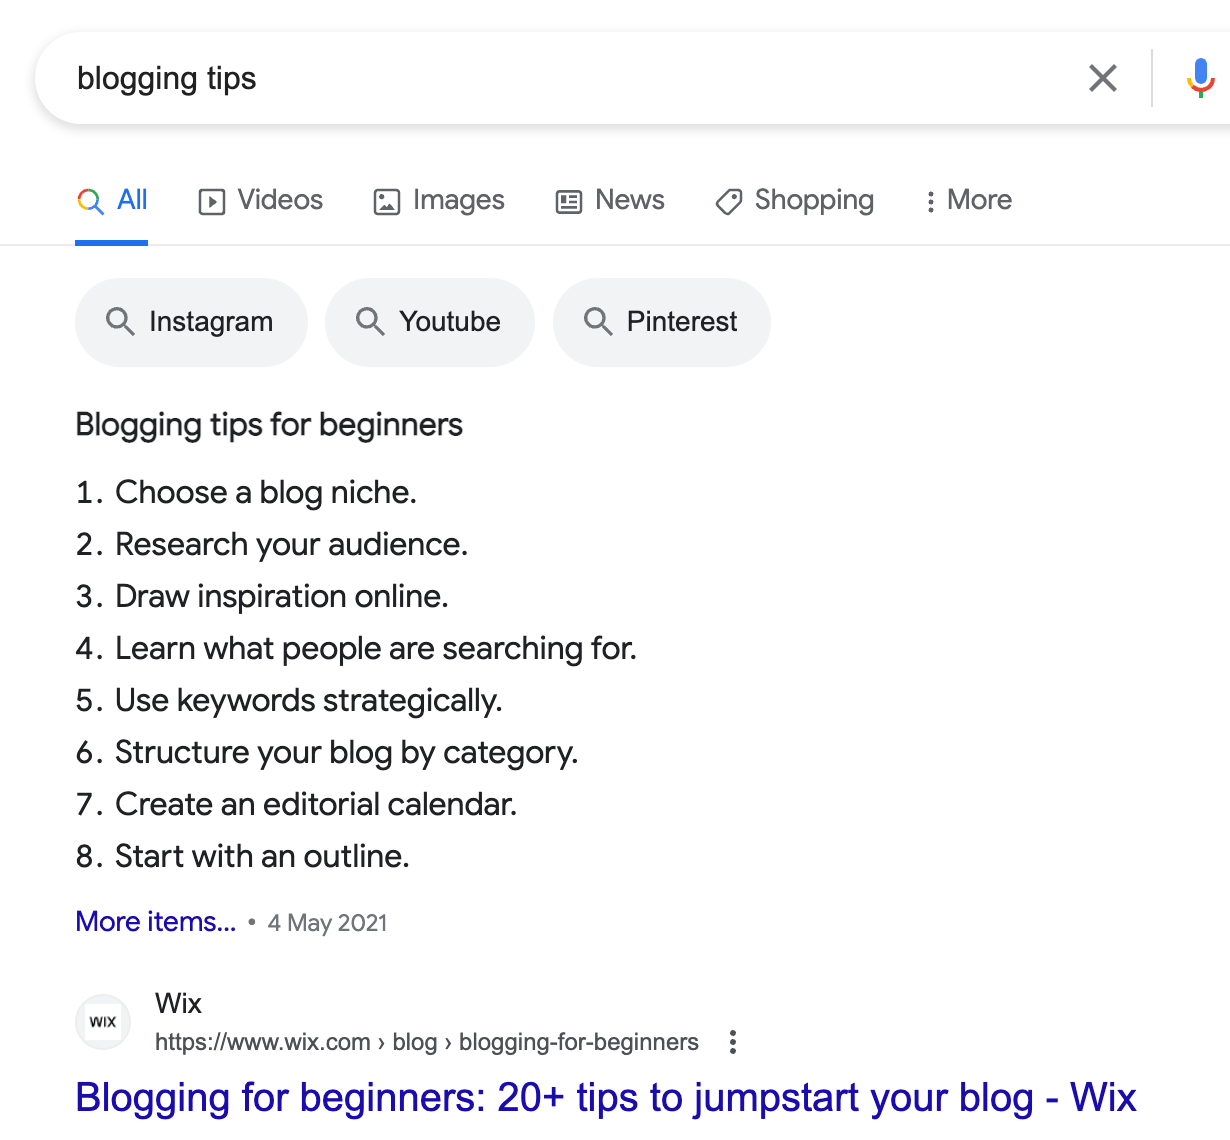 The previous featured snippet for blogging tips, which features clear subheadings